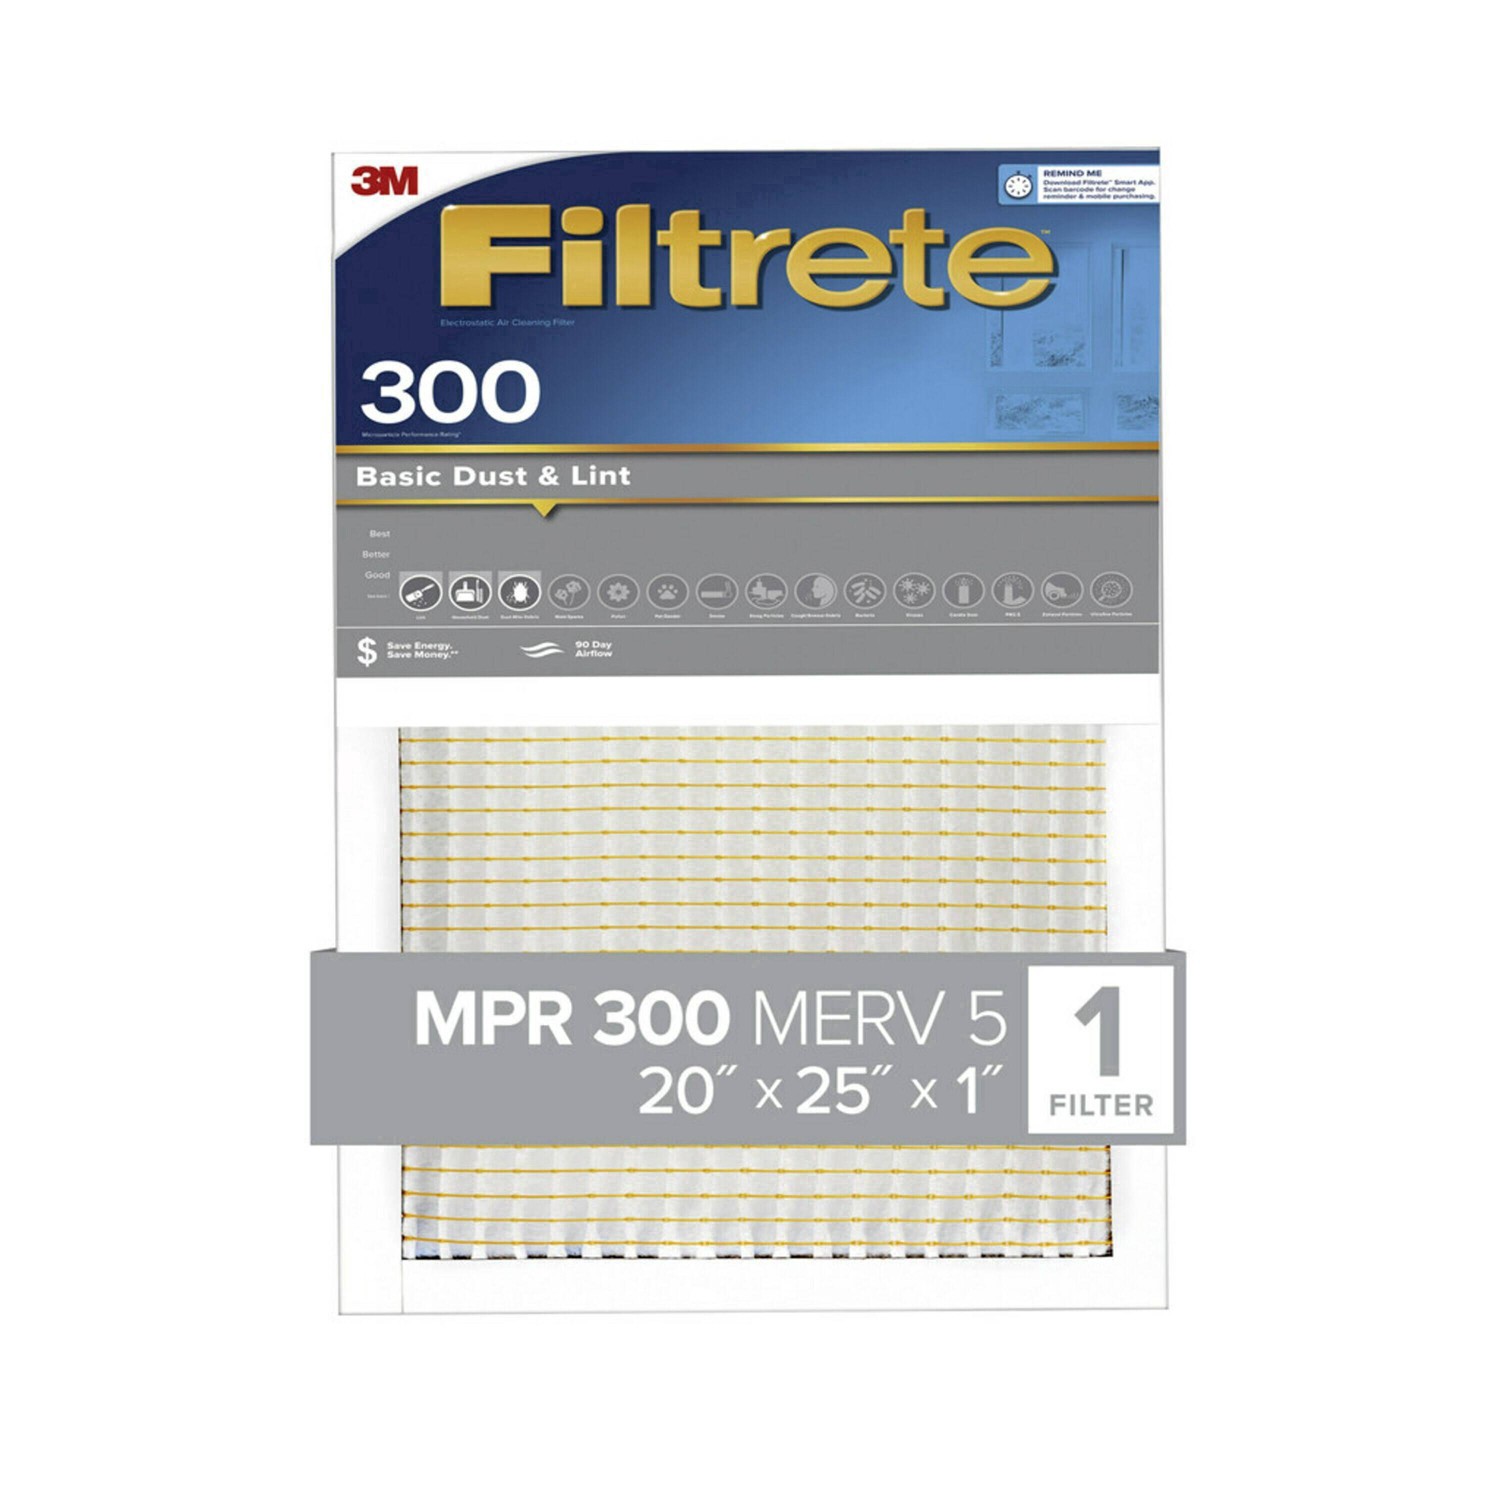 slide 11 of 23, Filtrete Dust Reduction Electrostatic Air Cleaning Filter 1 ea, 20 in x 25 in